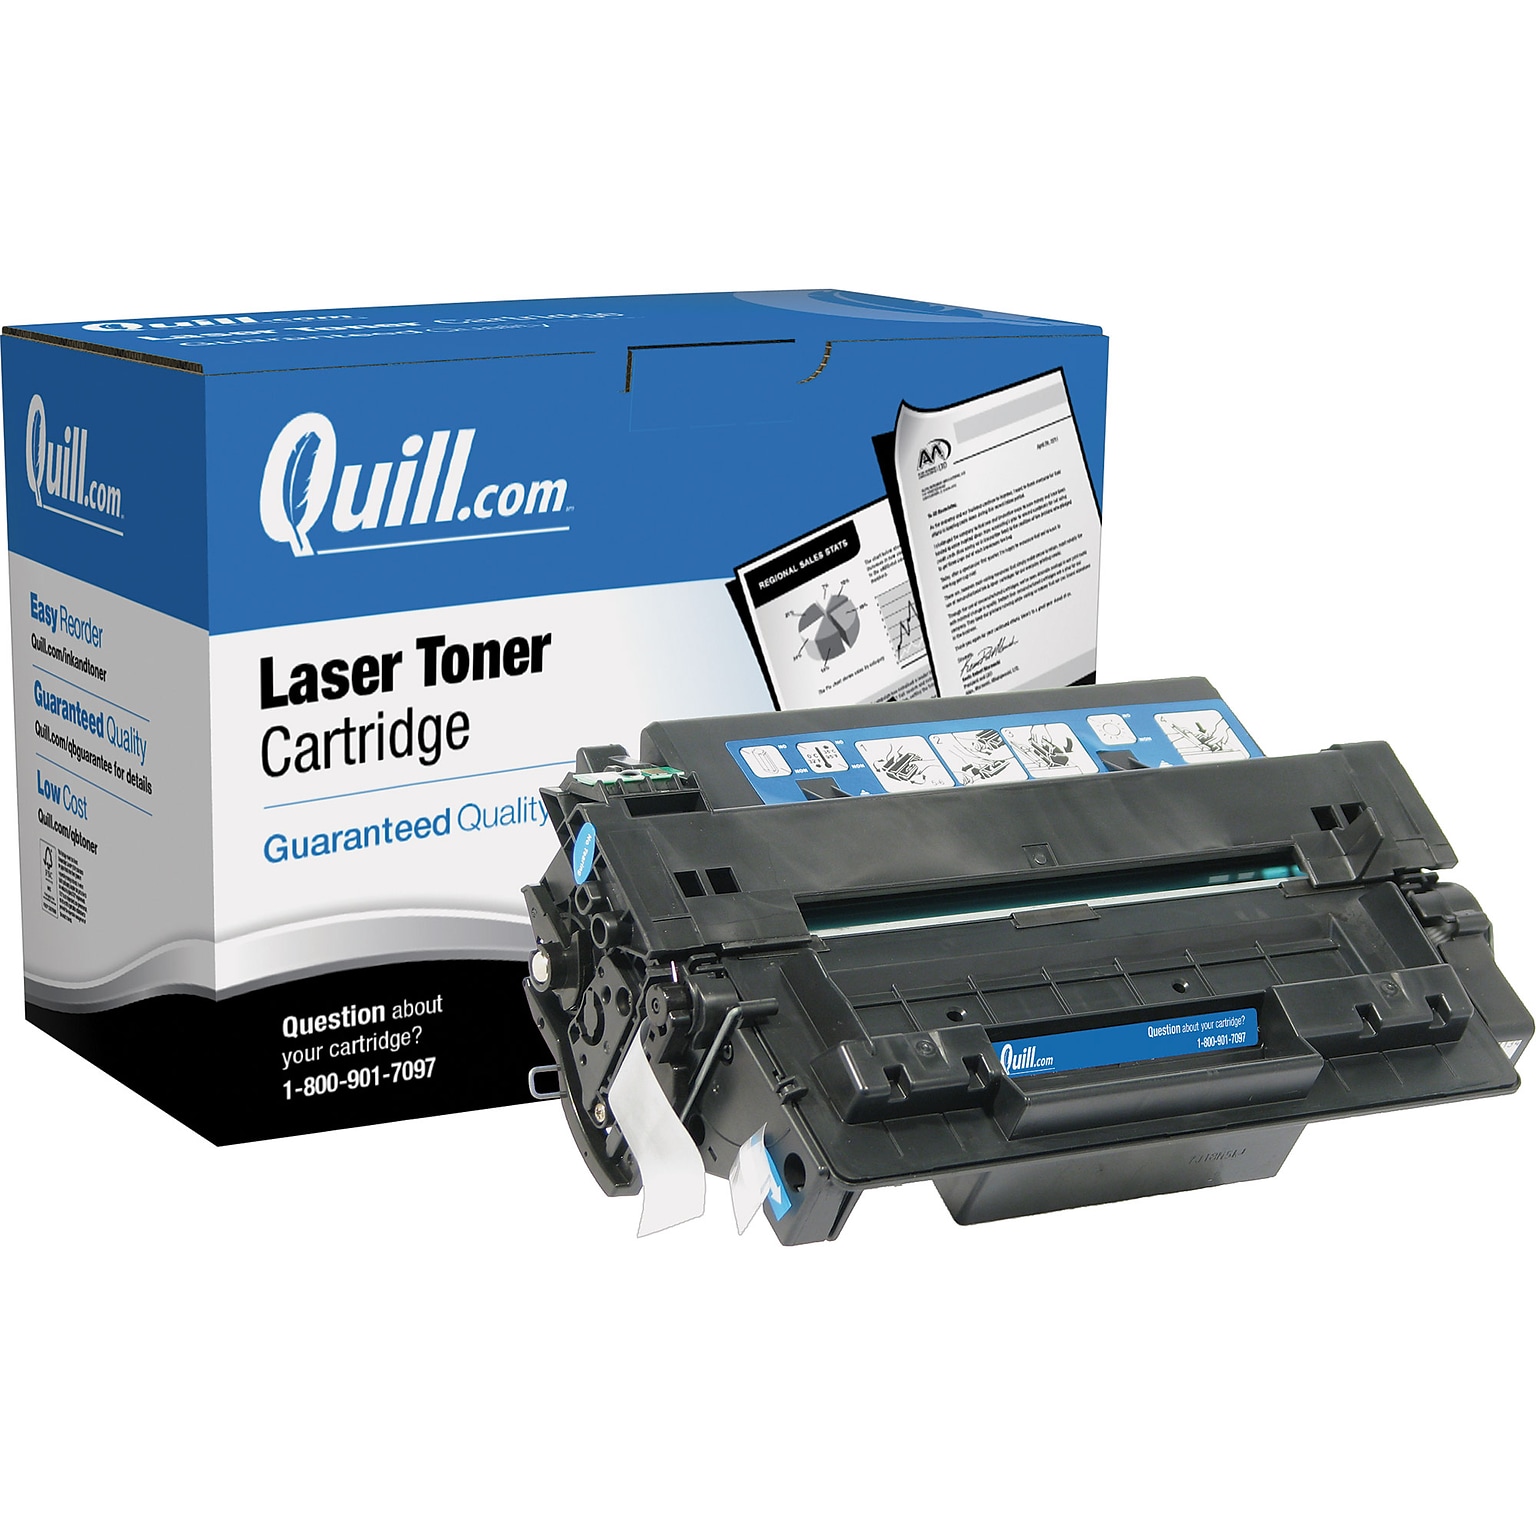 Quill Brand Remanufactured HP 51X (Q7551X) Black High Yield Laser Toner Cartridge (100% Satisfaction Guaranteed)